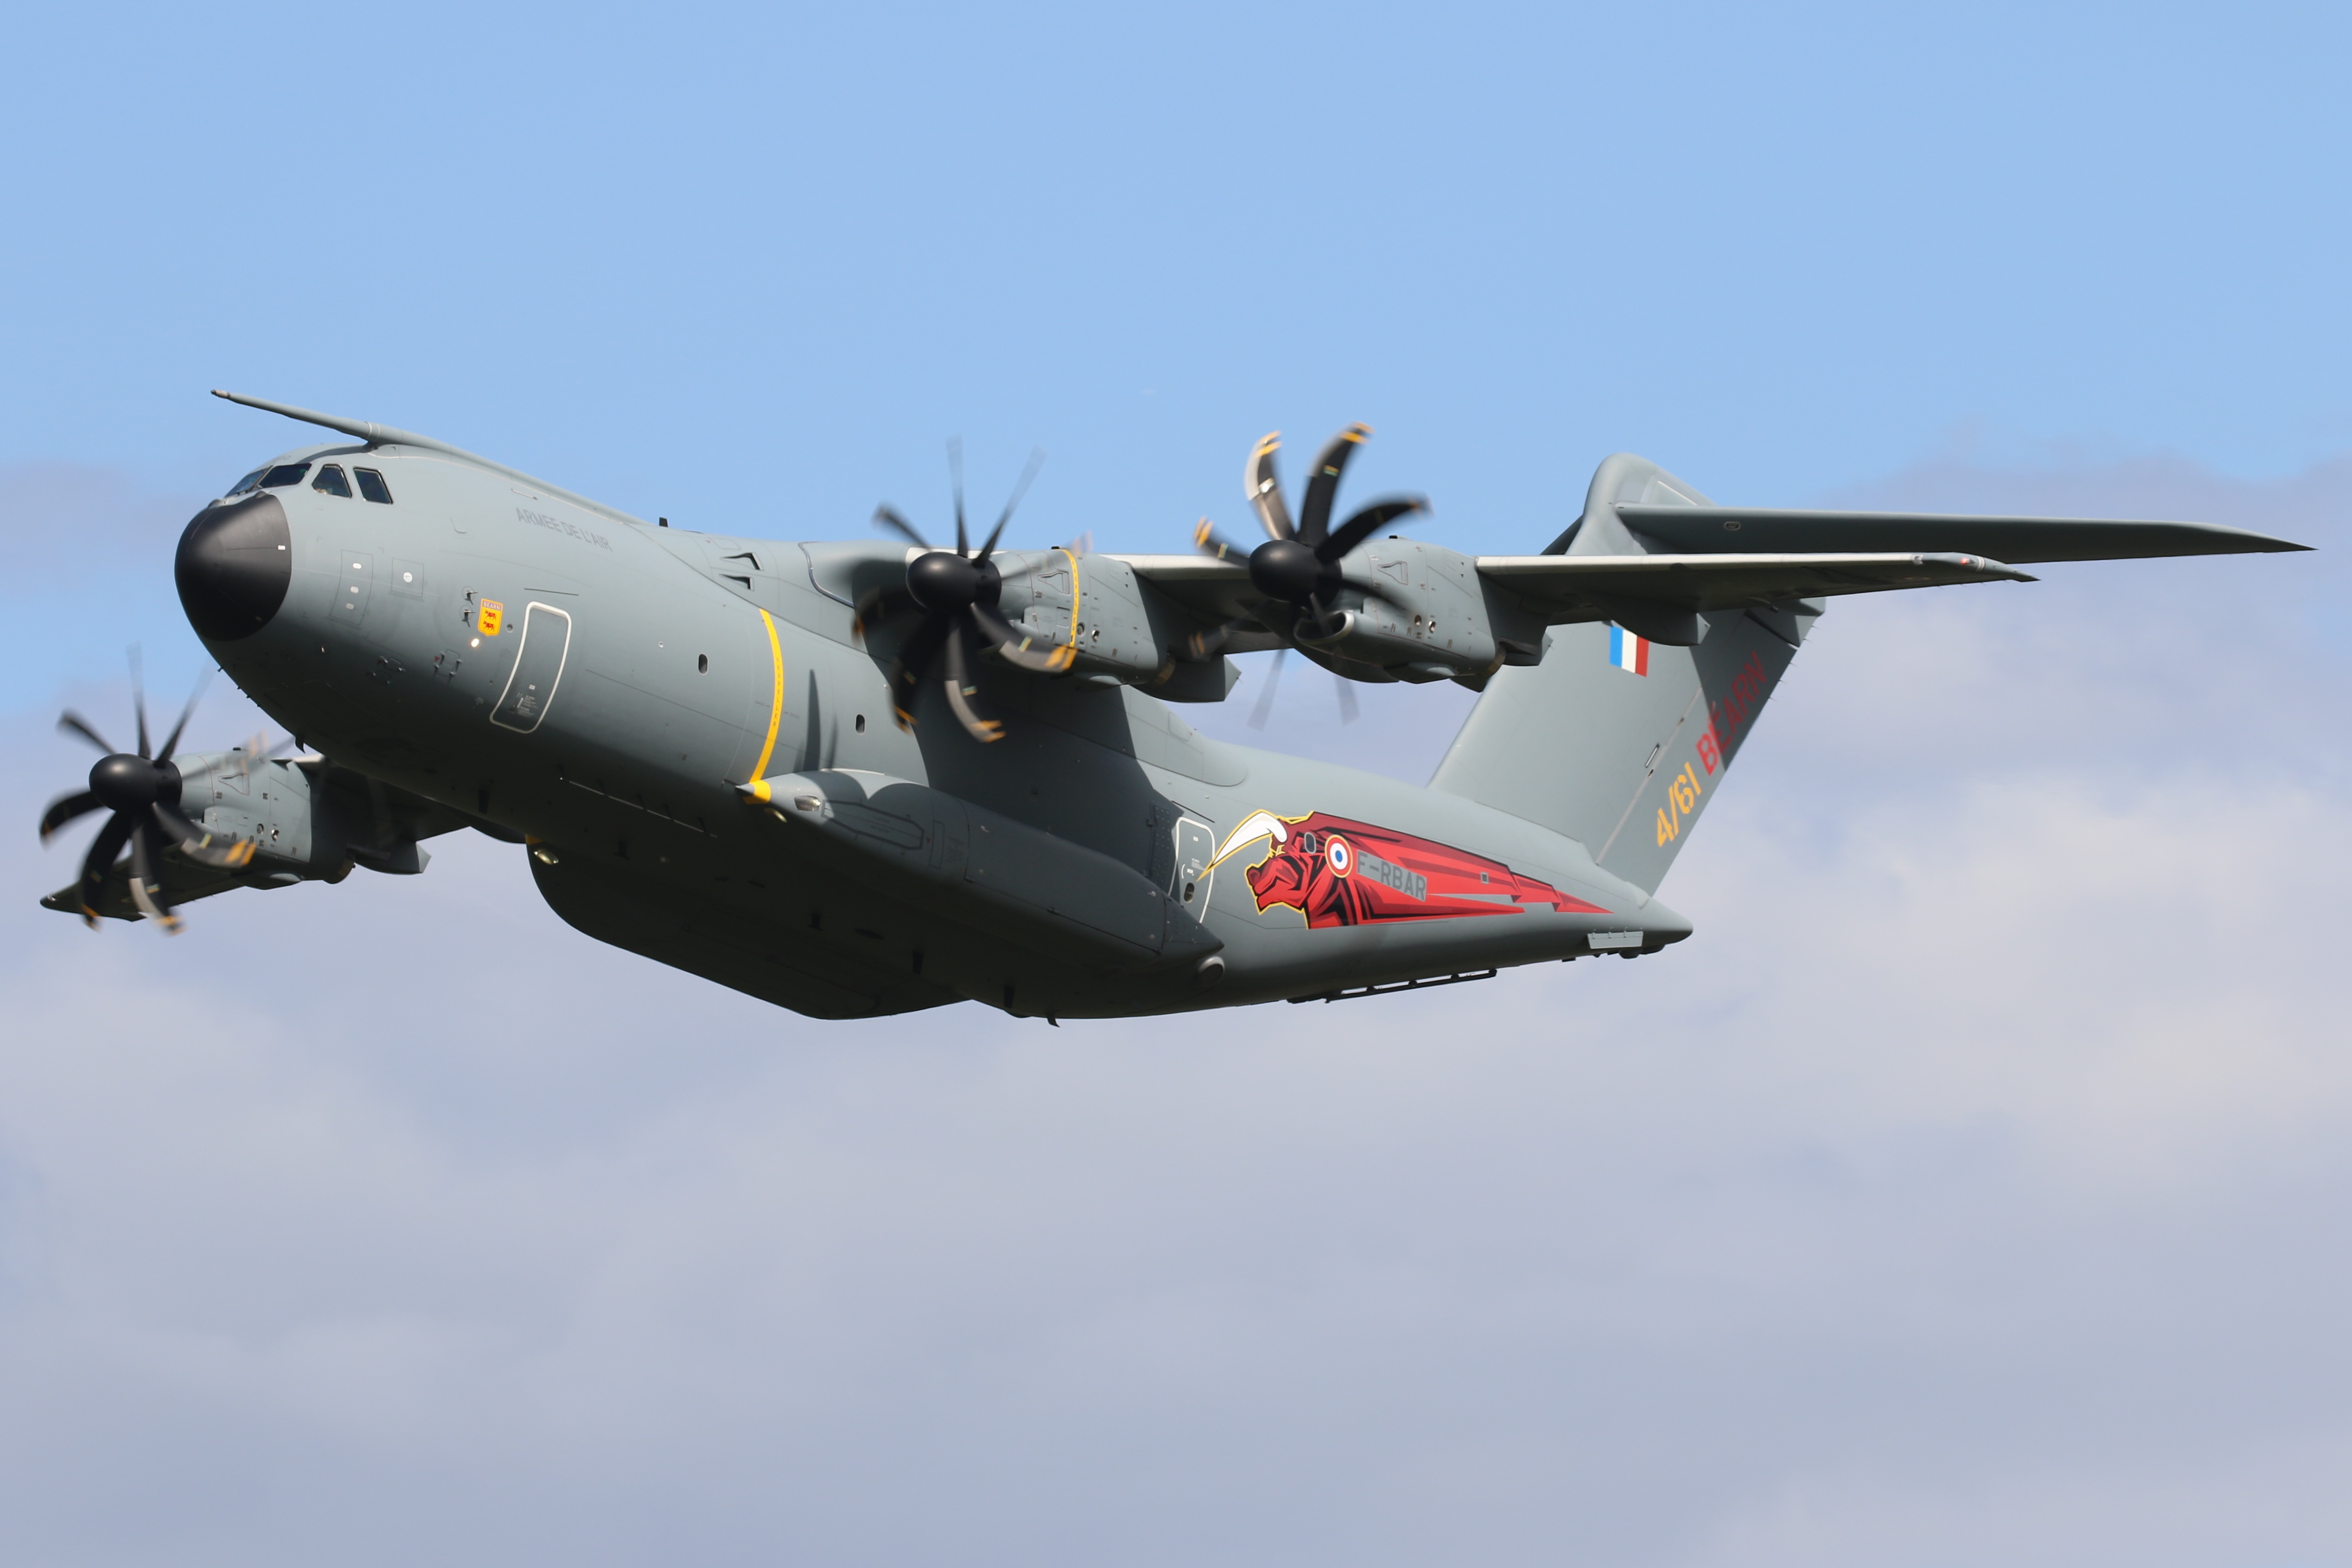 Second A400M unit at Orléans-Bricy